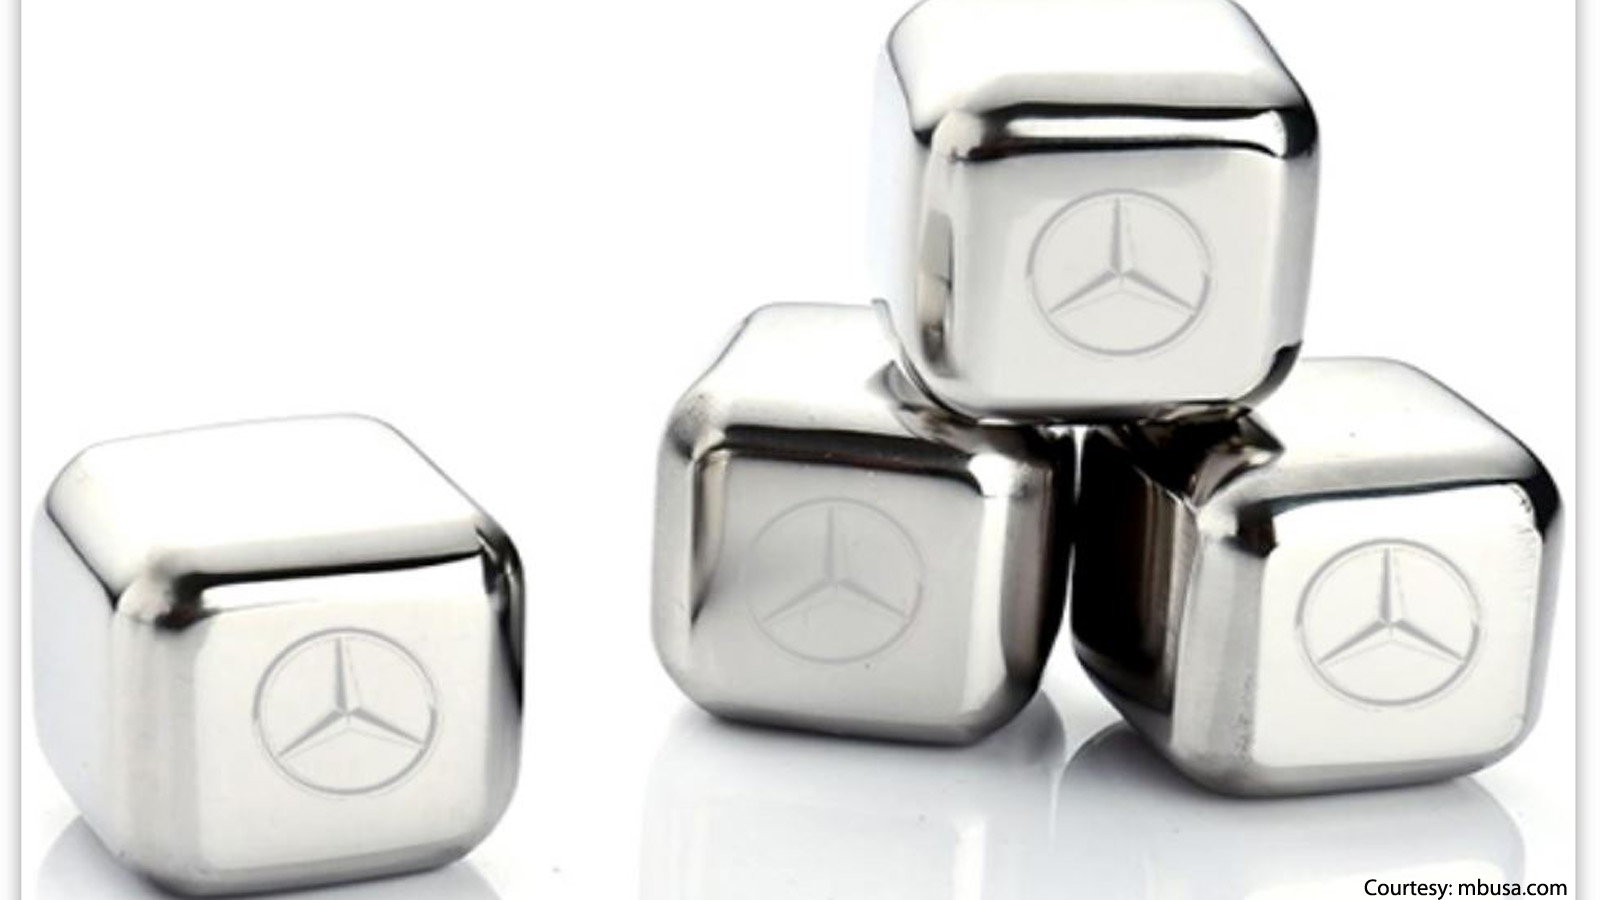 7 Gifts for the Mercedes-Benz Lover in